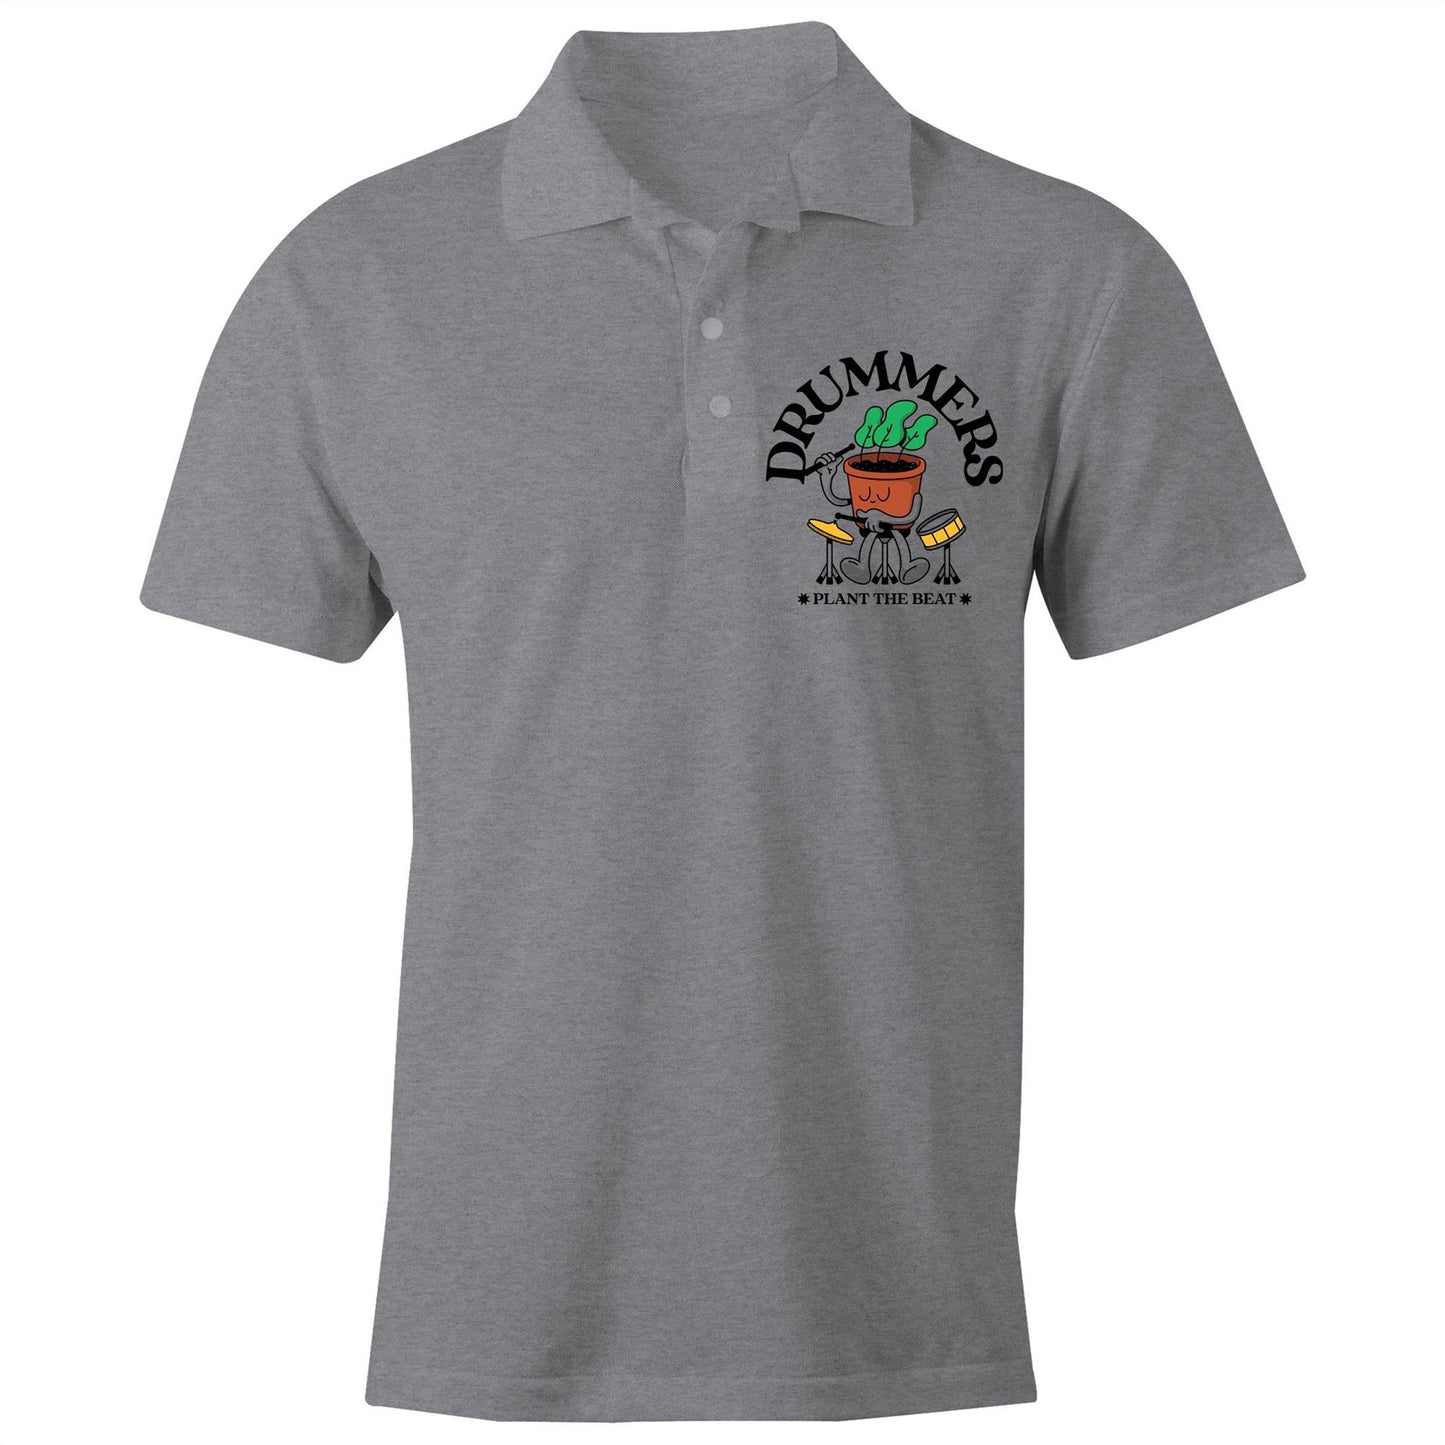 Drummers Plant The Beat - Chad S/S Polo Shirt, Printed Grey Marle Polo Shirt Music Plants